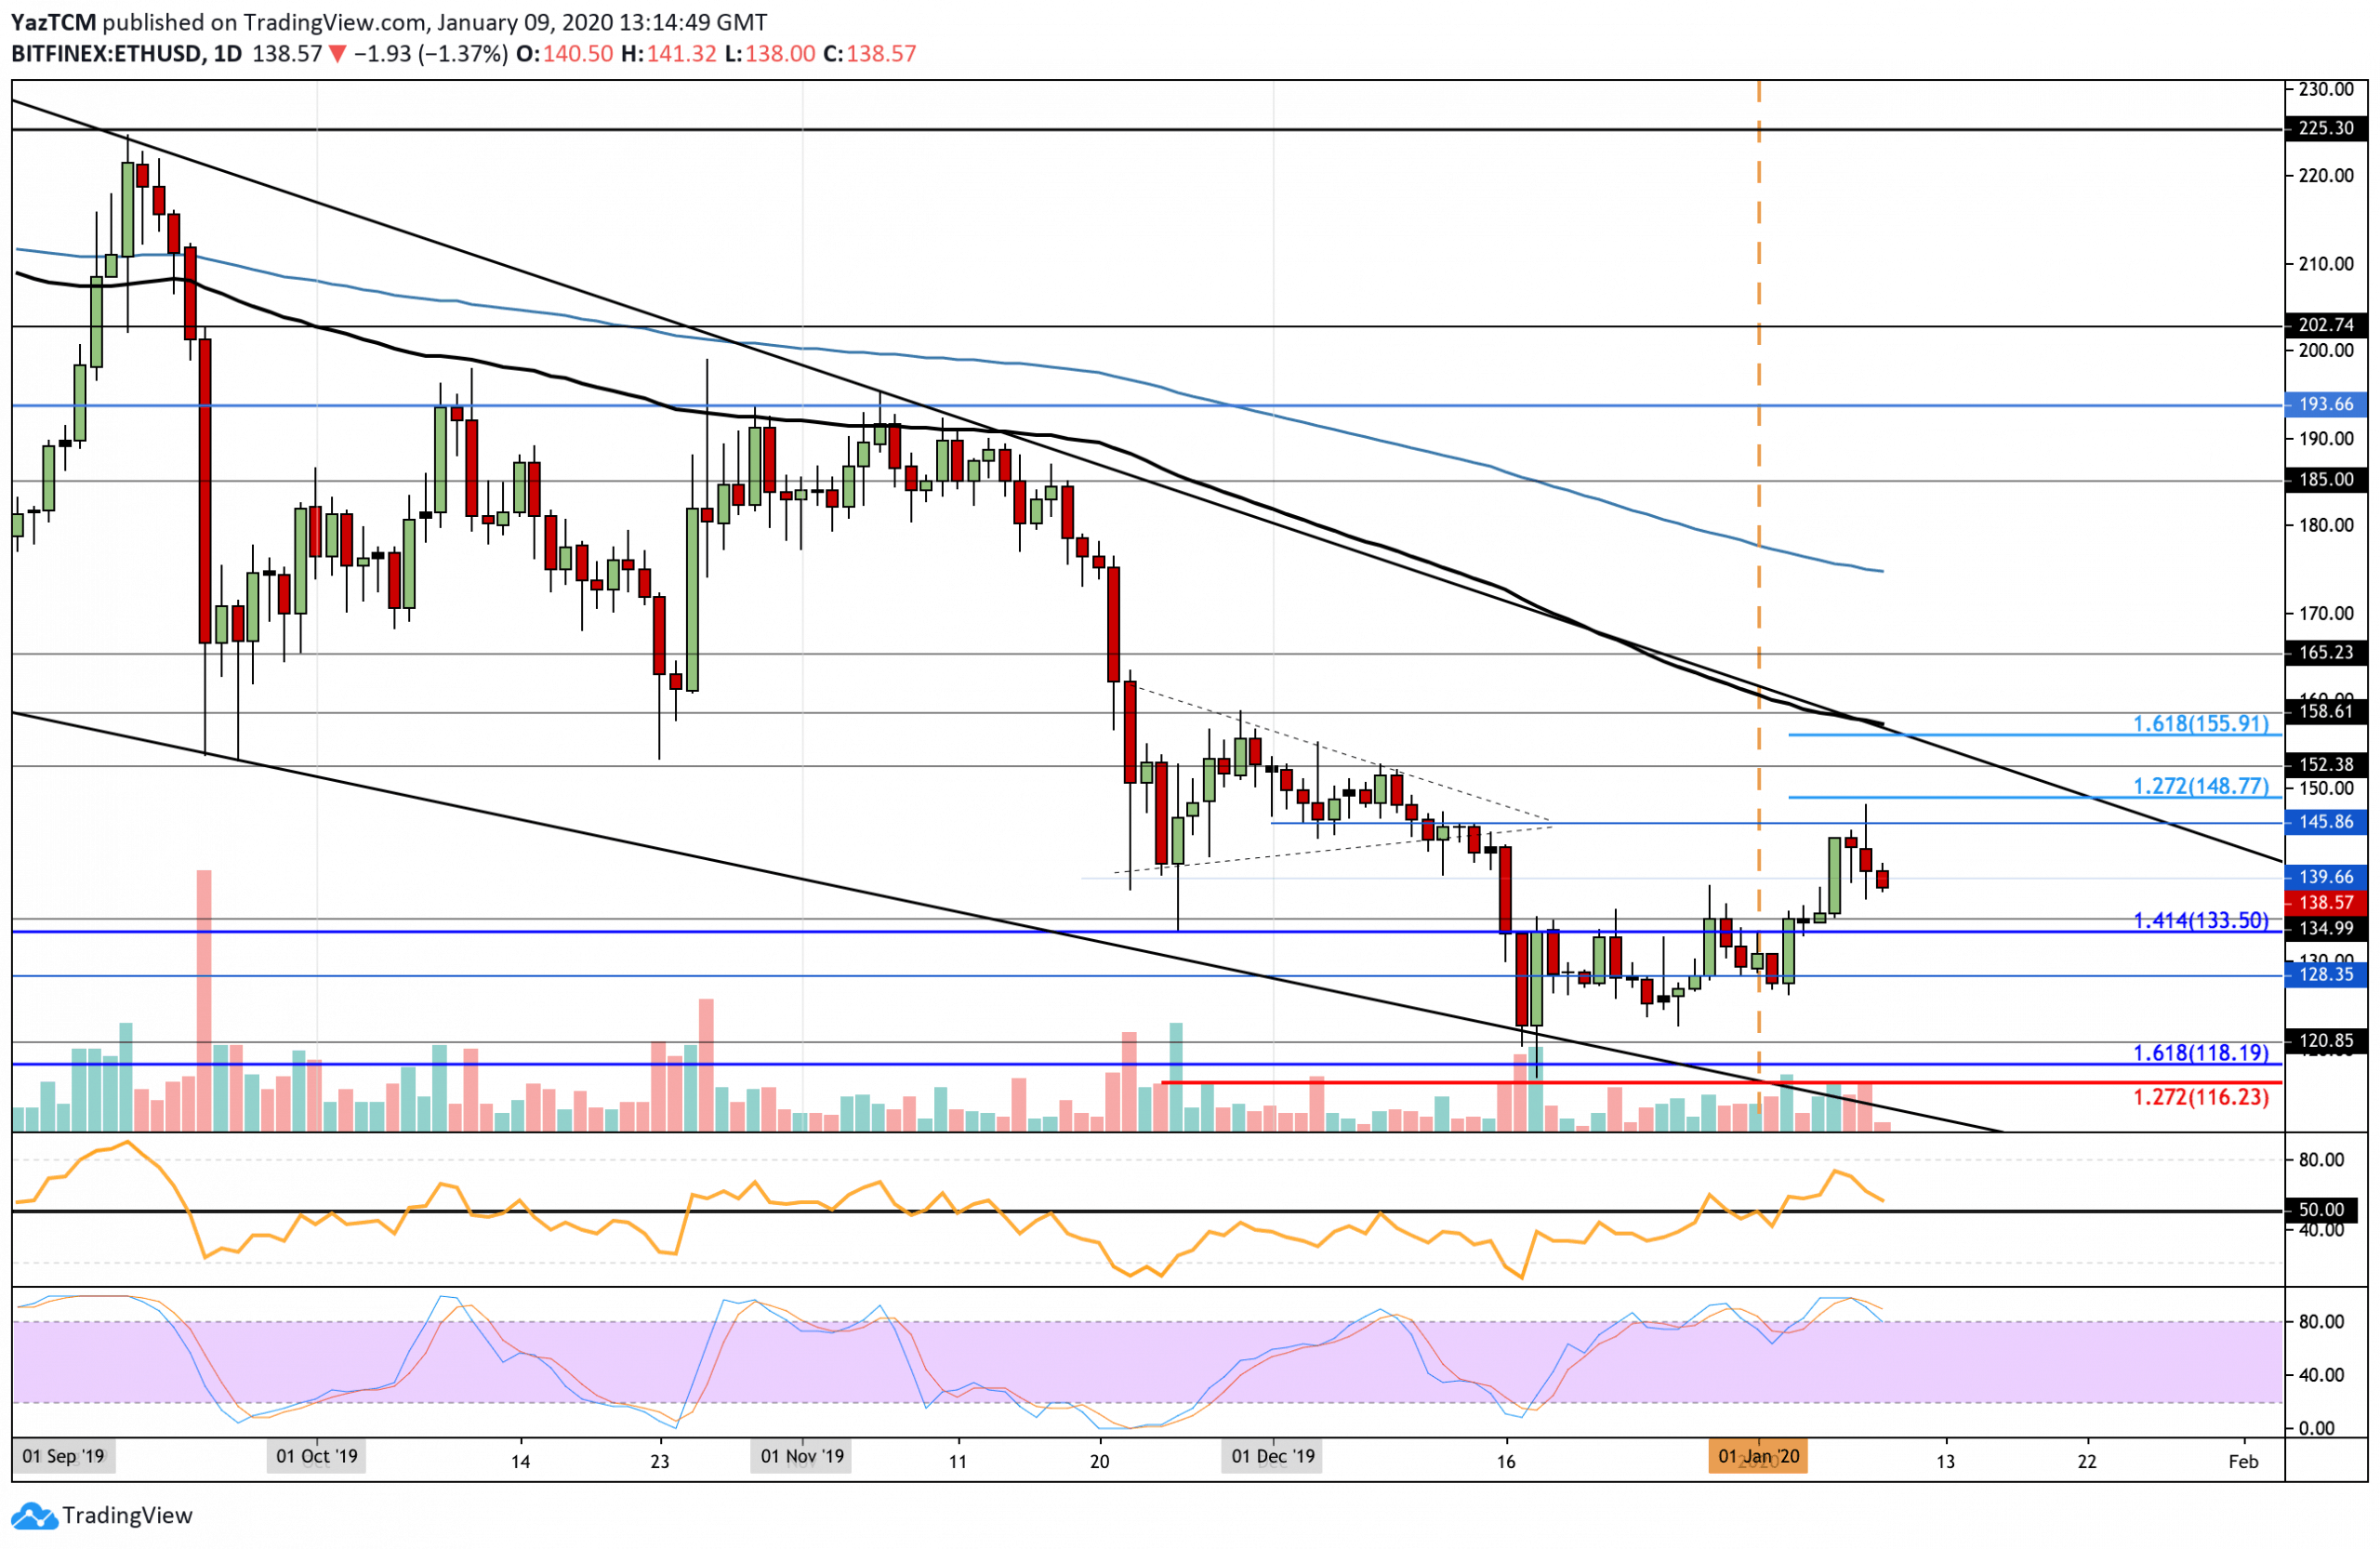 Ethereum Price Drops Below $140 Following The Latest Bitcoin Plunge: ETH Price Analysis & Overview